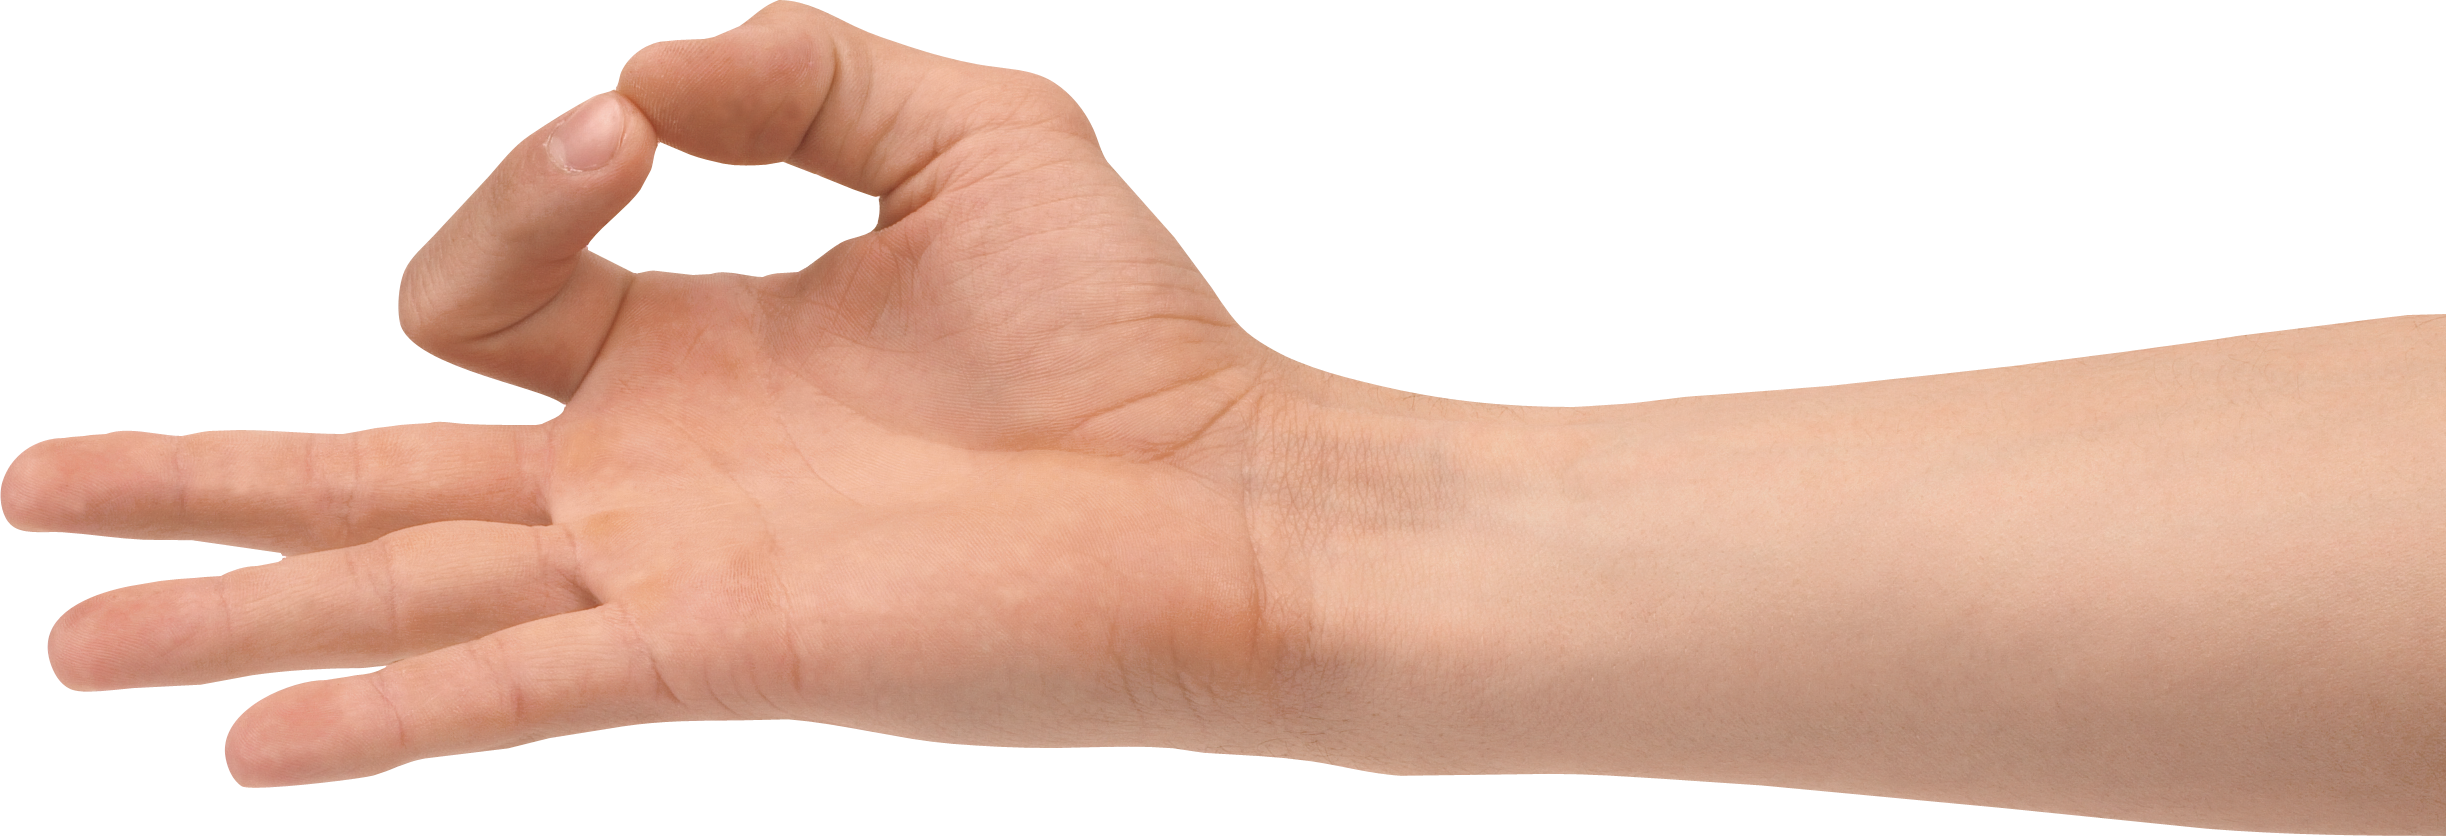 Hands png free images. Hand clipart arm